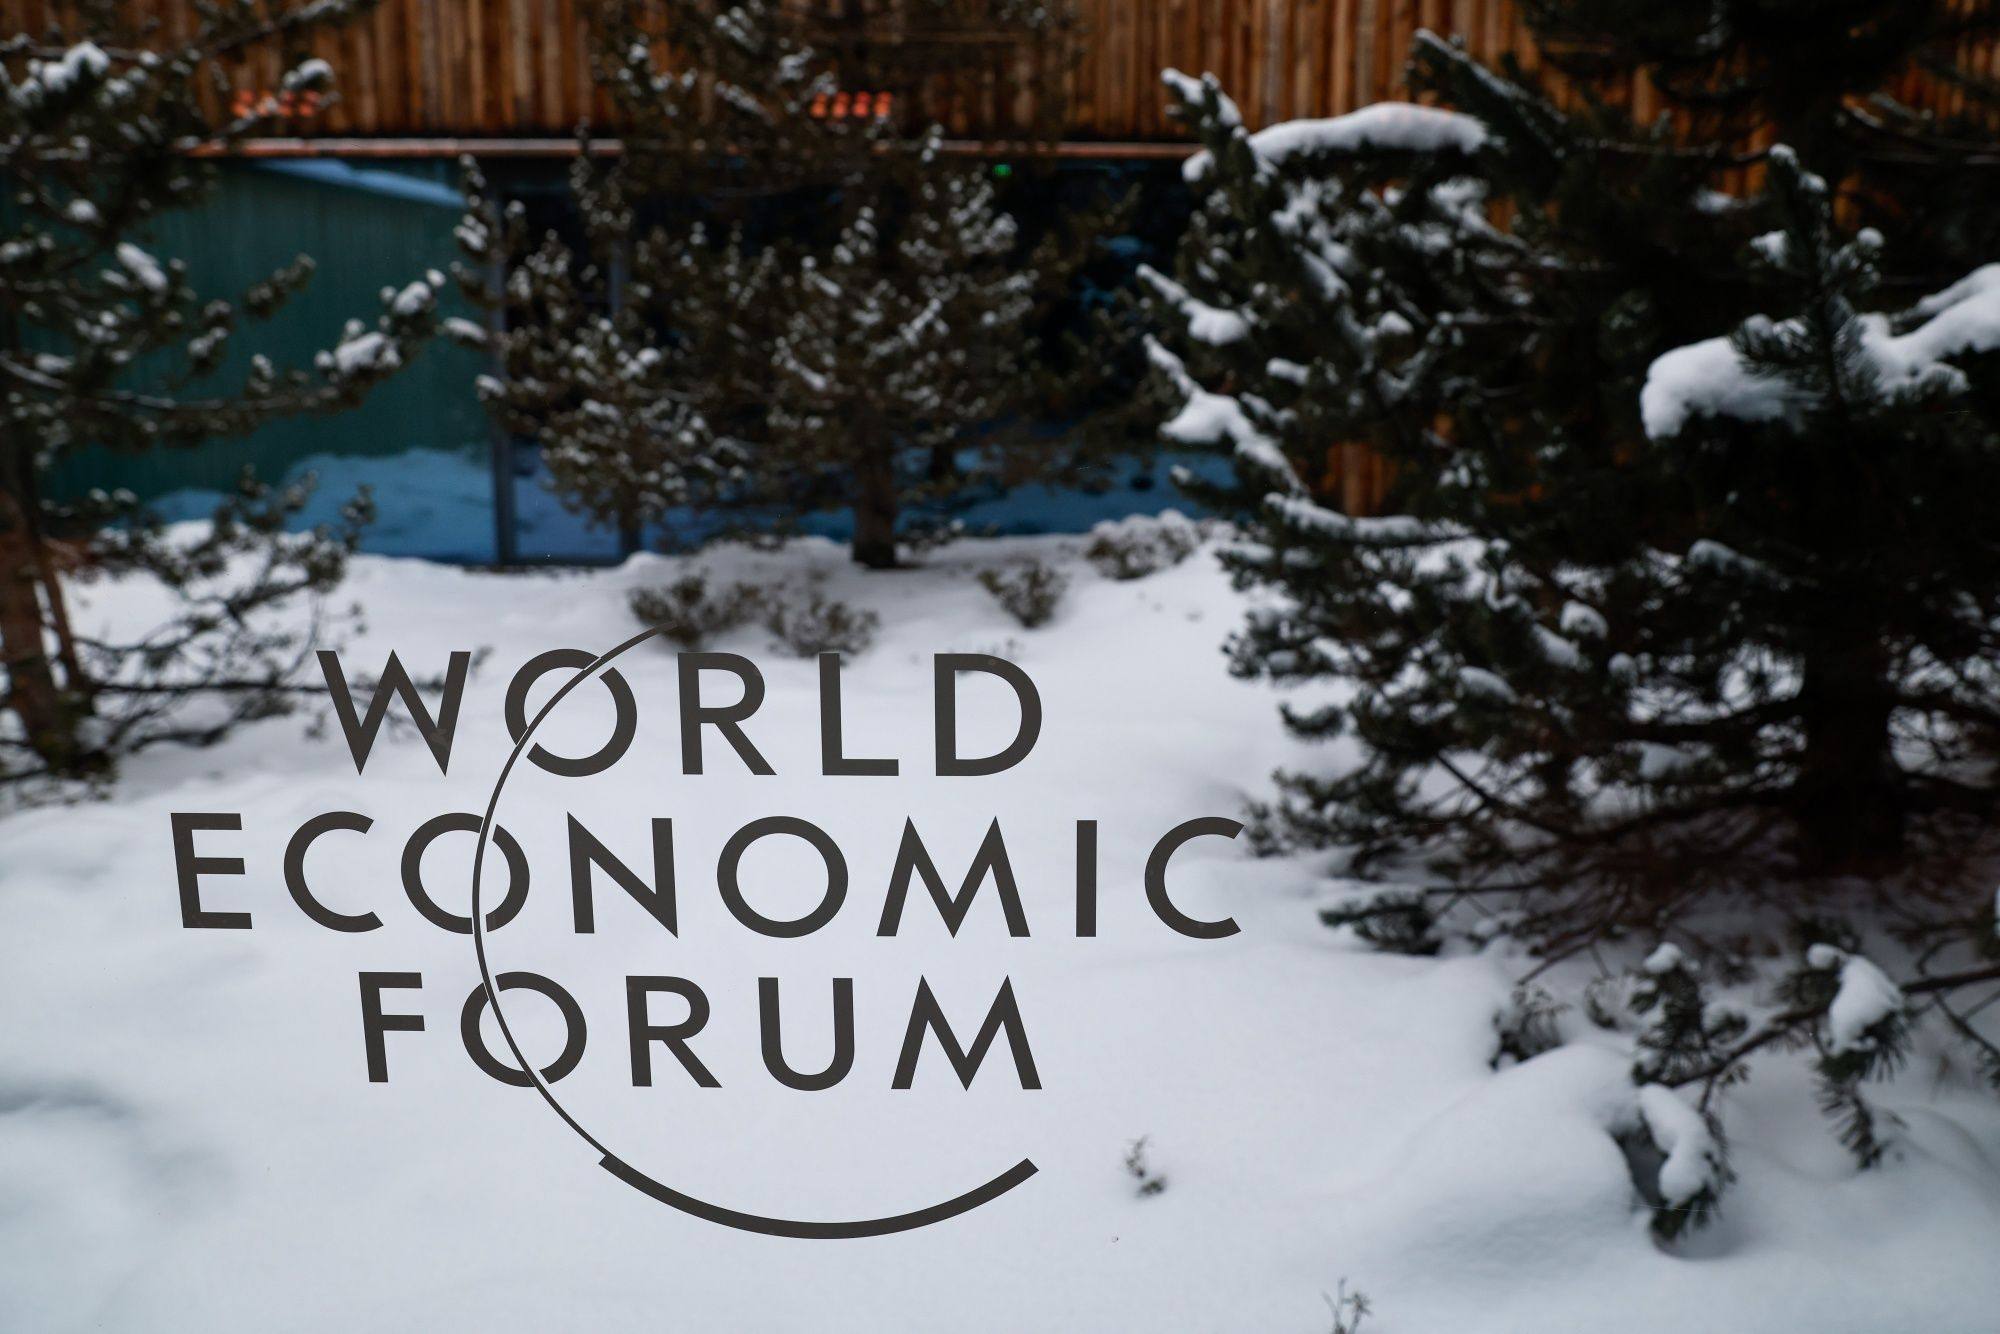 A logo on a window at the Congress Centre during the World Economic Forum in Davos, Switzerland, on January 19. Photo: Bloomberg